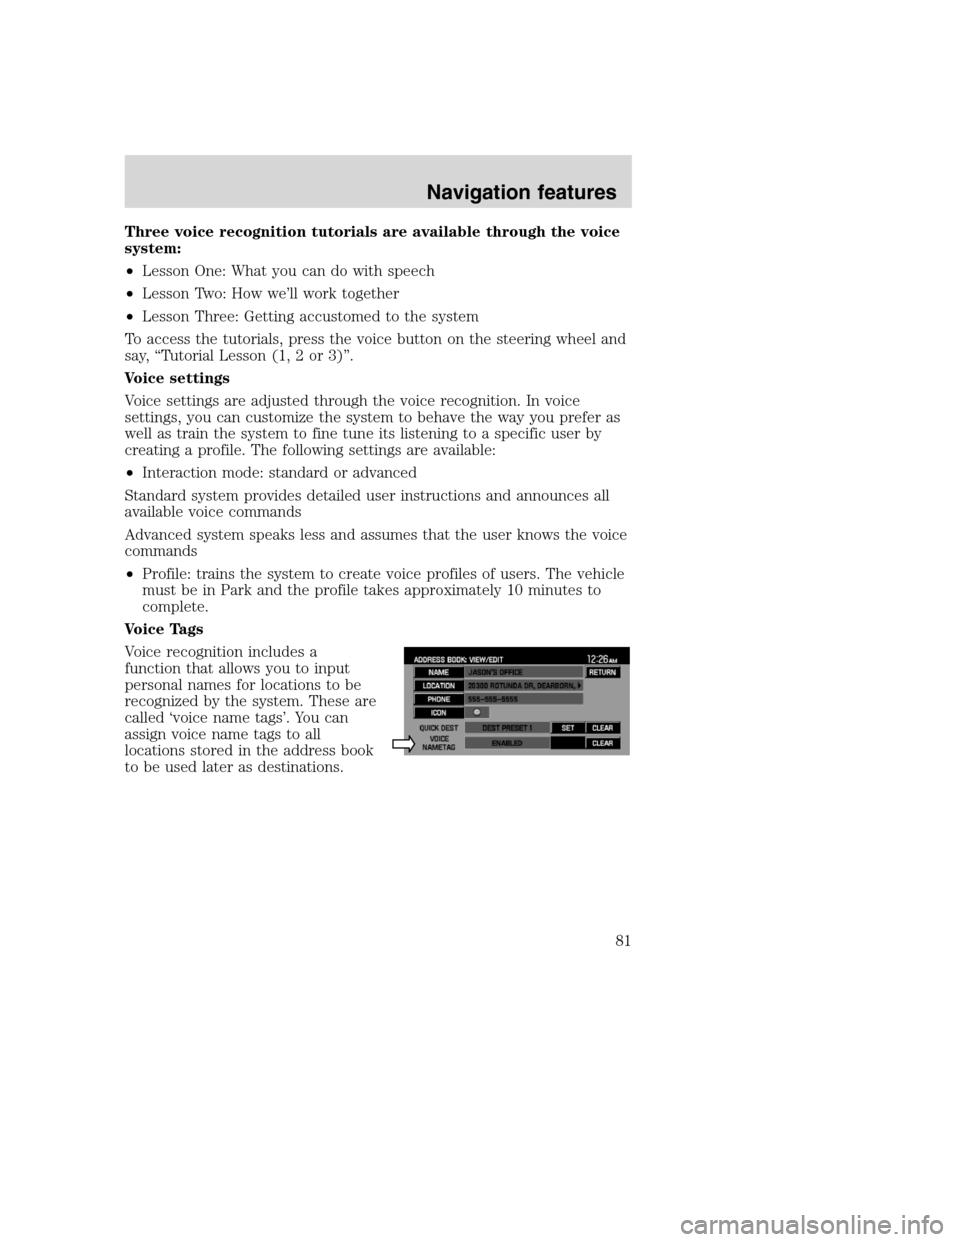 Mercury Mountaineer 2008  Pioneer Navigation System Supplement Three voice recognition tutorials are available through the voice
system:
•Lesson One: What you can do with speech
•Lesson Two: How we’ll work together
•Lesson Three: Getting accustomed to the